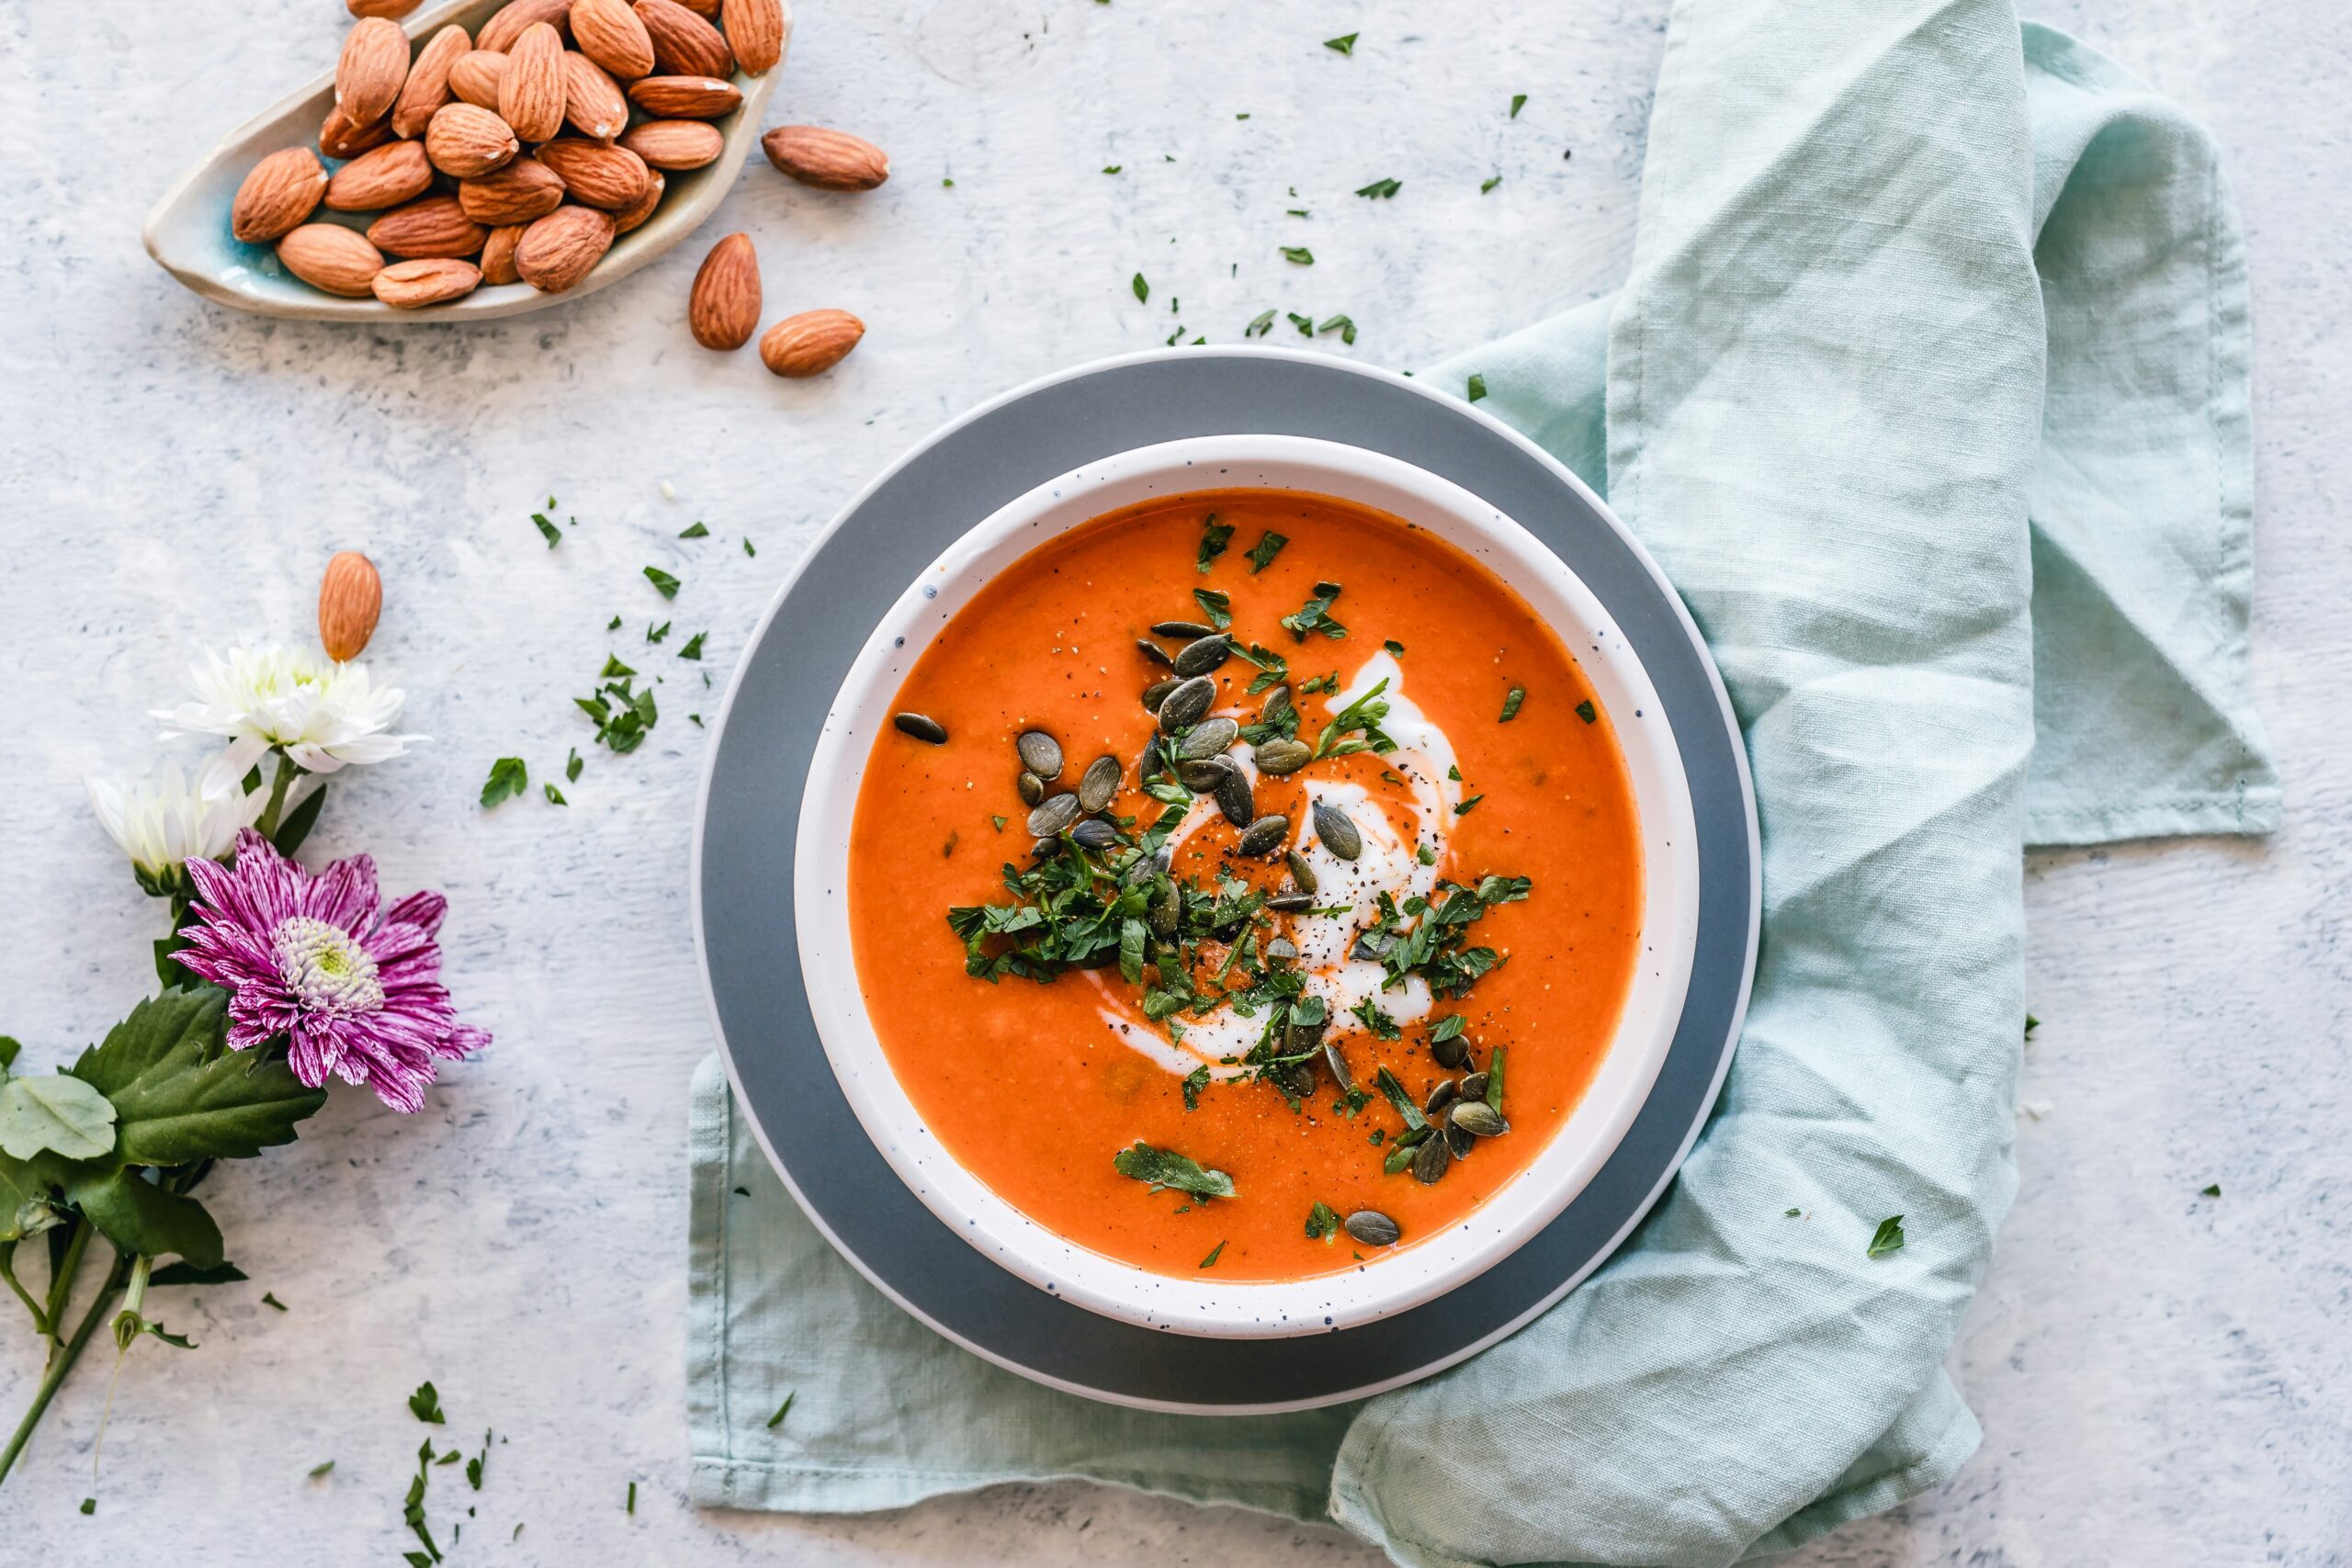 Soup is another great starter idea for a Valentine's Day dinner. Pictured: Tomato Bisque soup